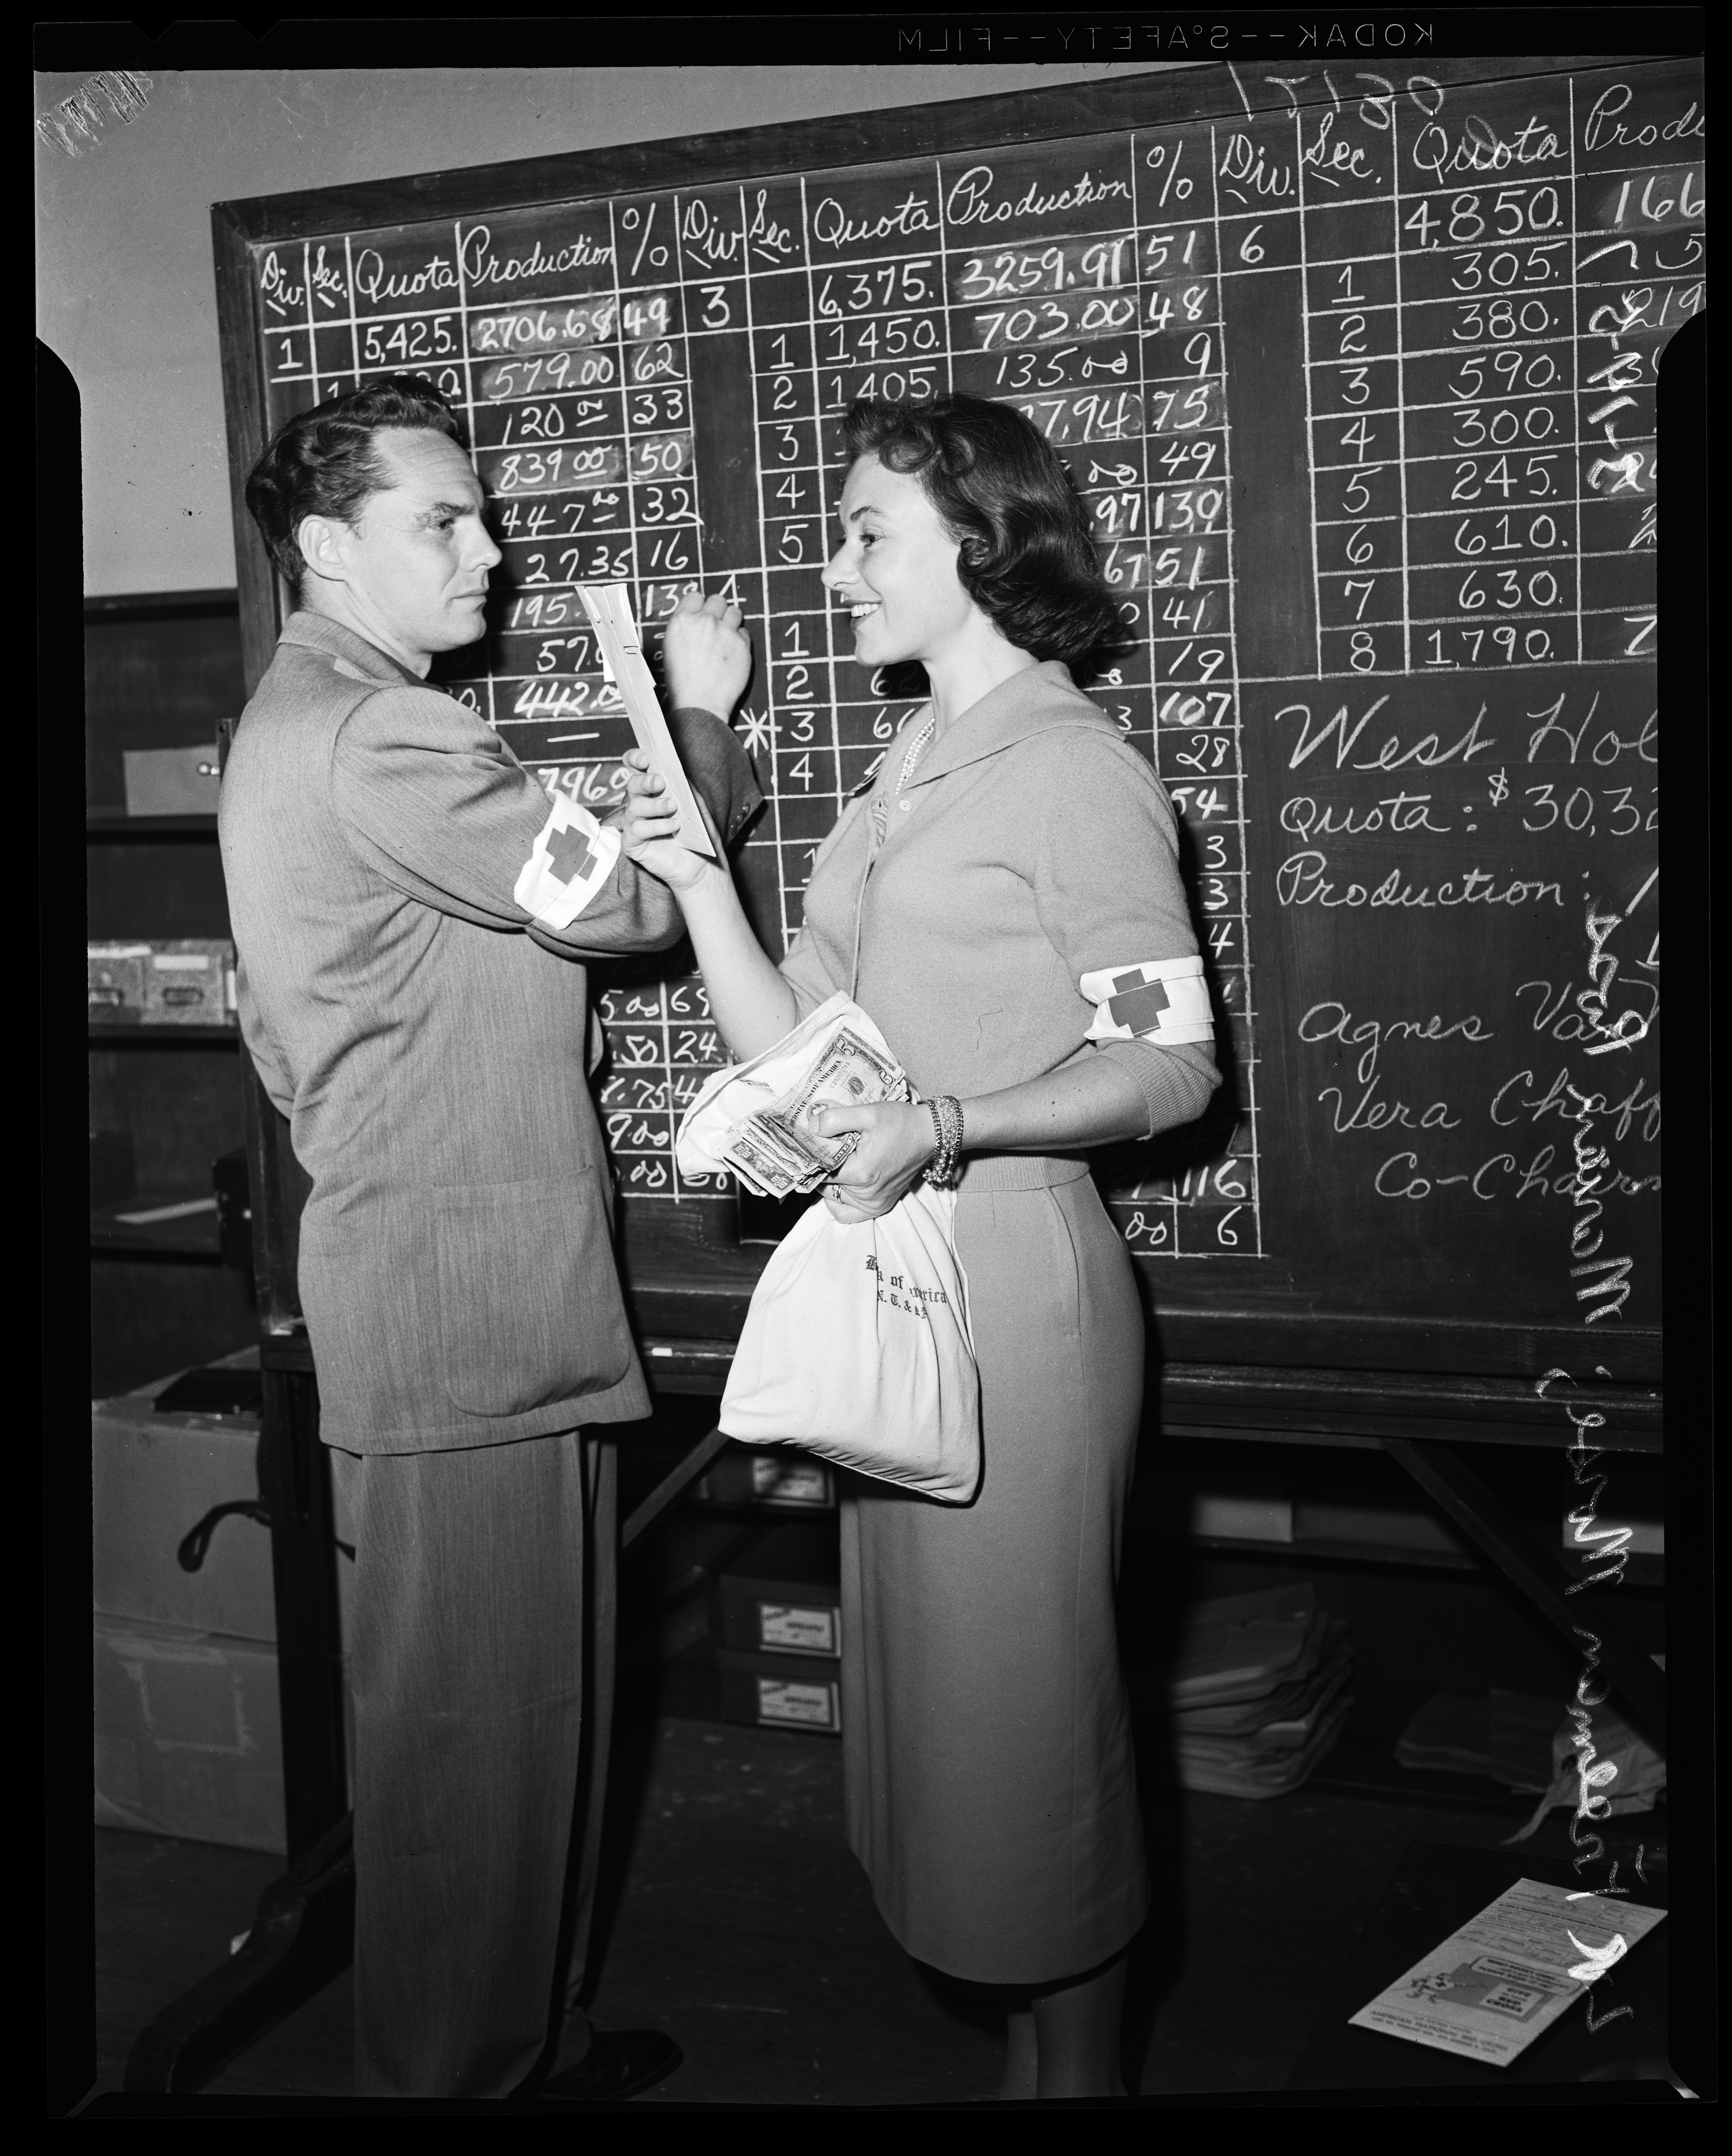 Marion Ross and Freeman Morse at the Red Cross Drive, 14 May 1957 | Source: Getty Images